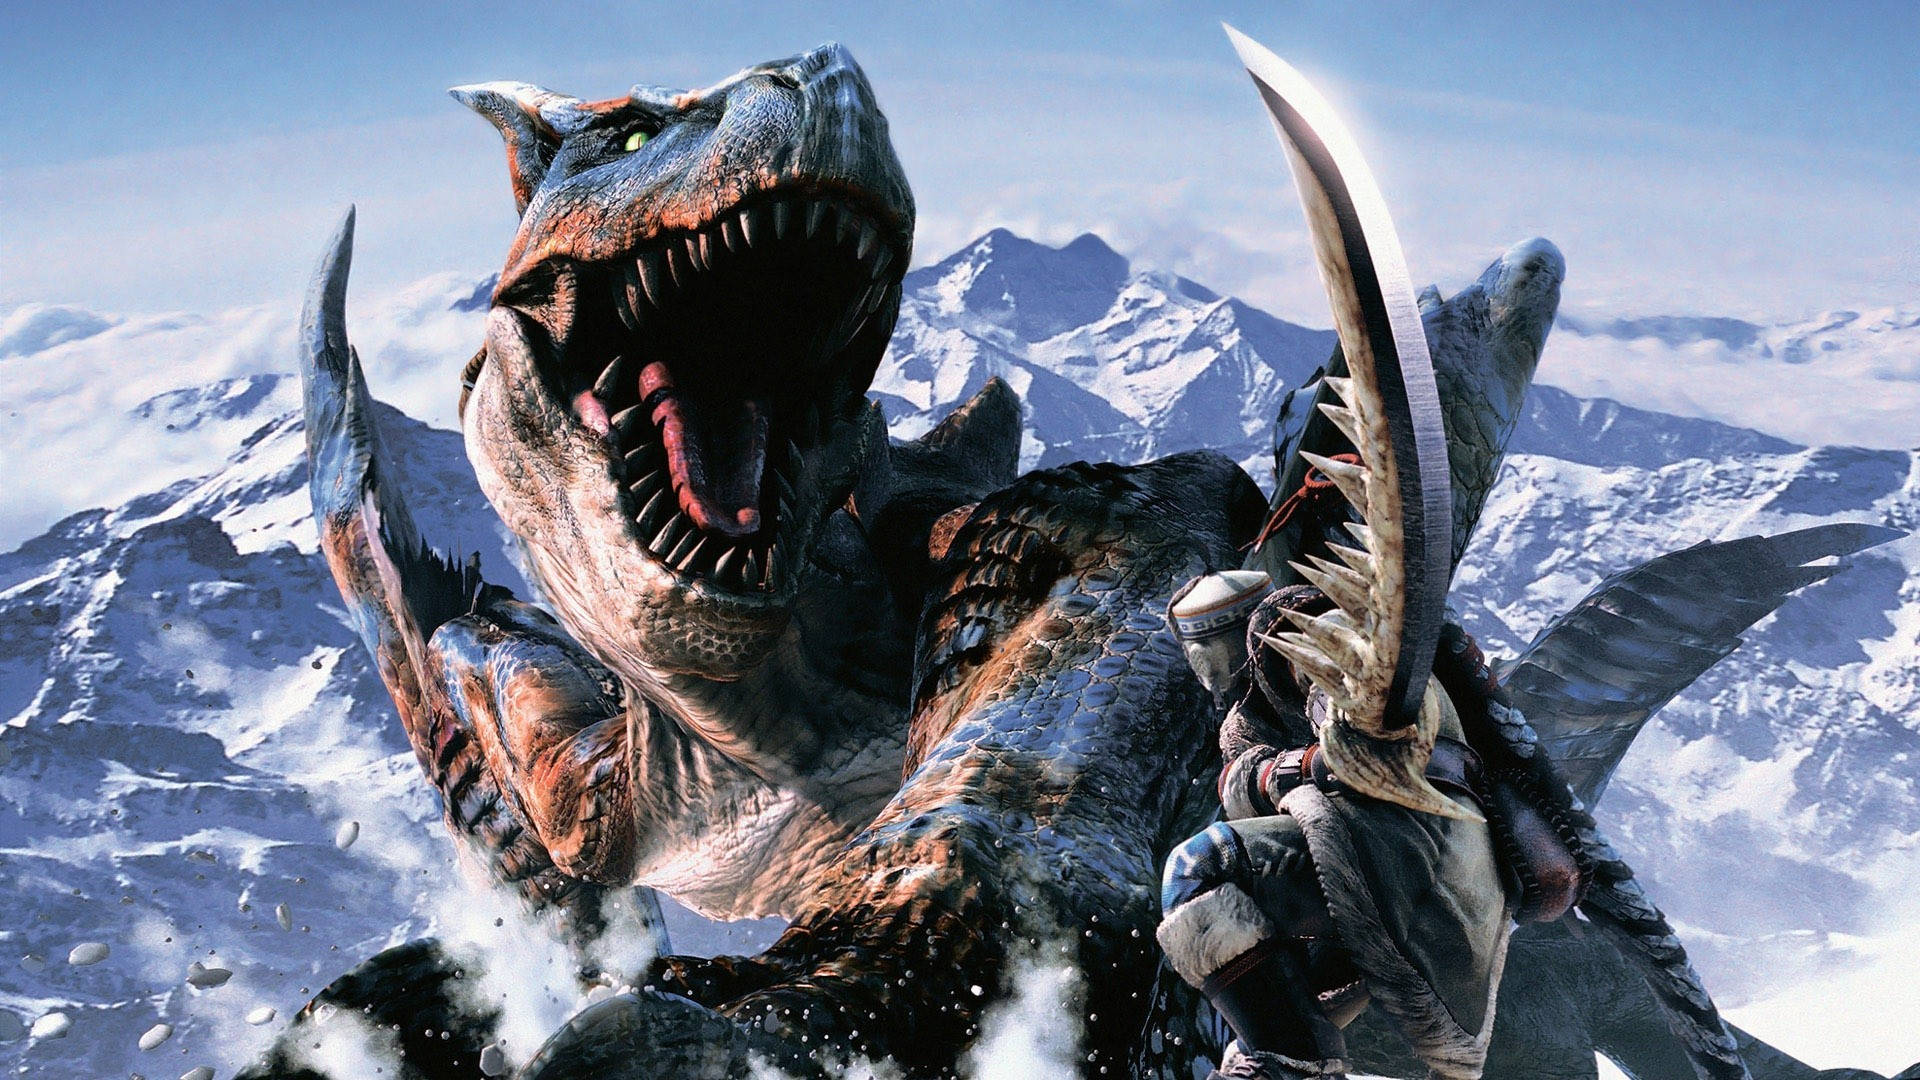 A mighty foe awaits in the snow-covered mountains: The Tigrex. Wallpaper